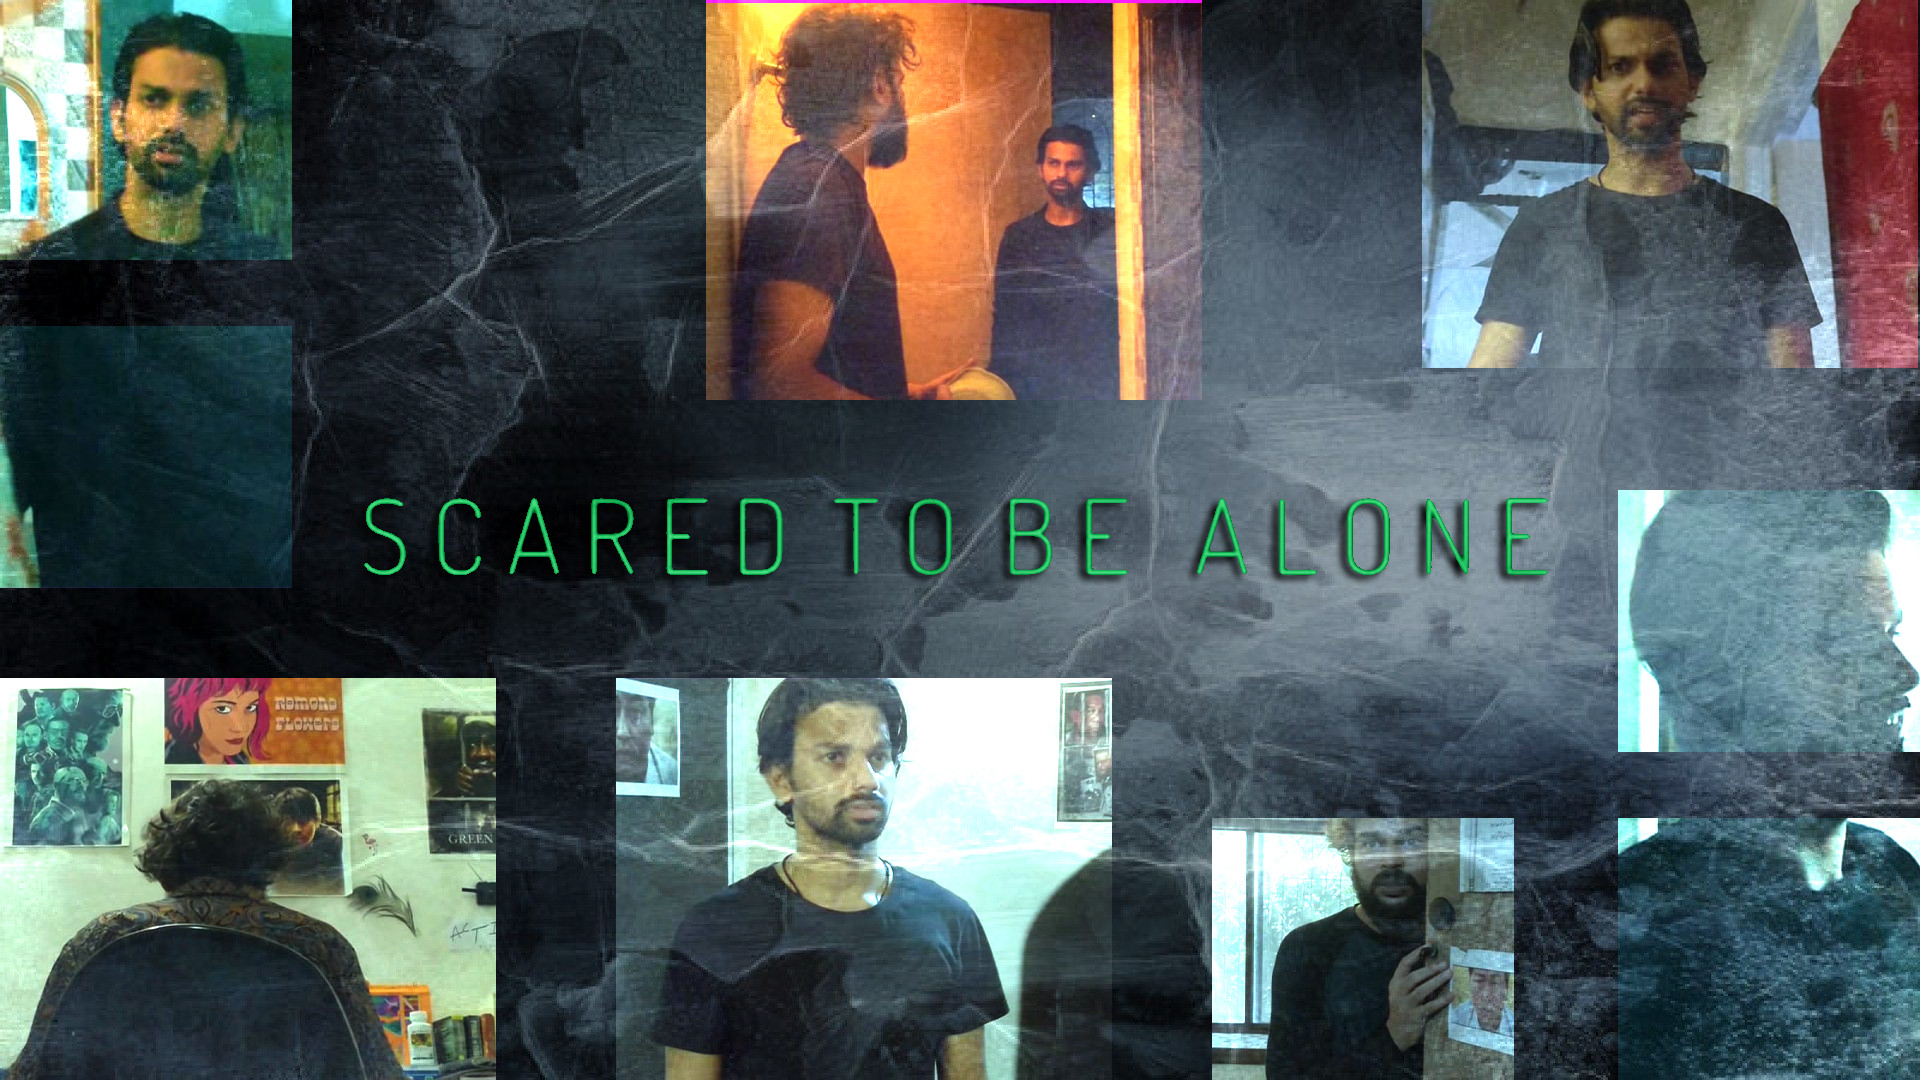 SCARED TO BE ALONE